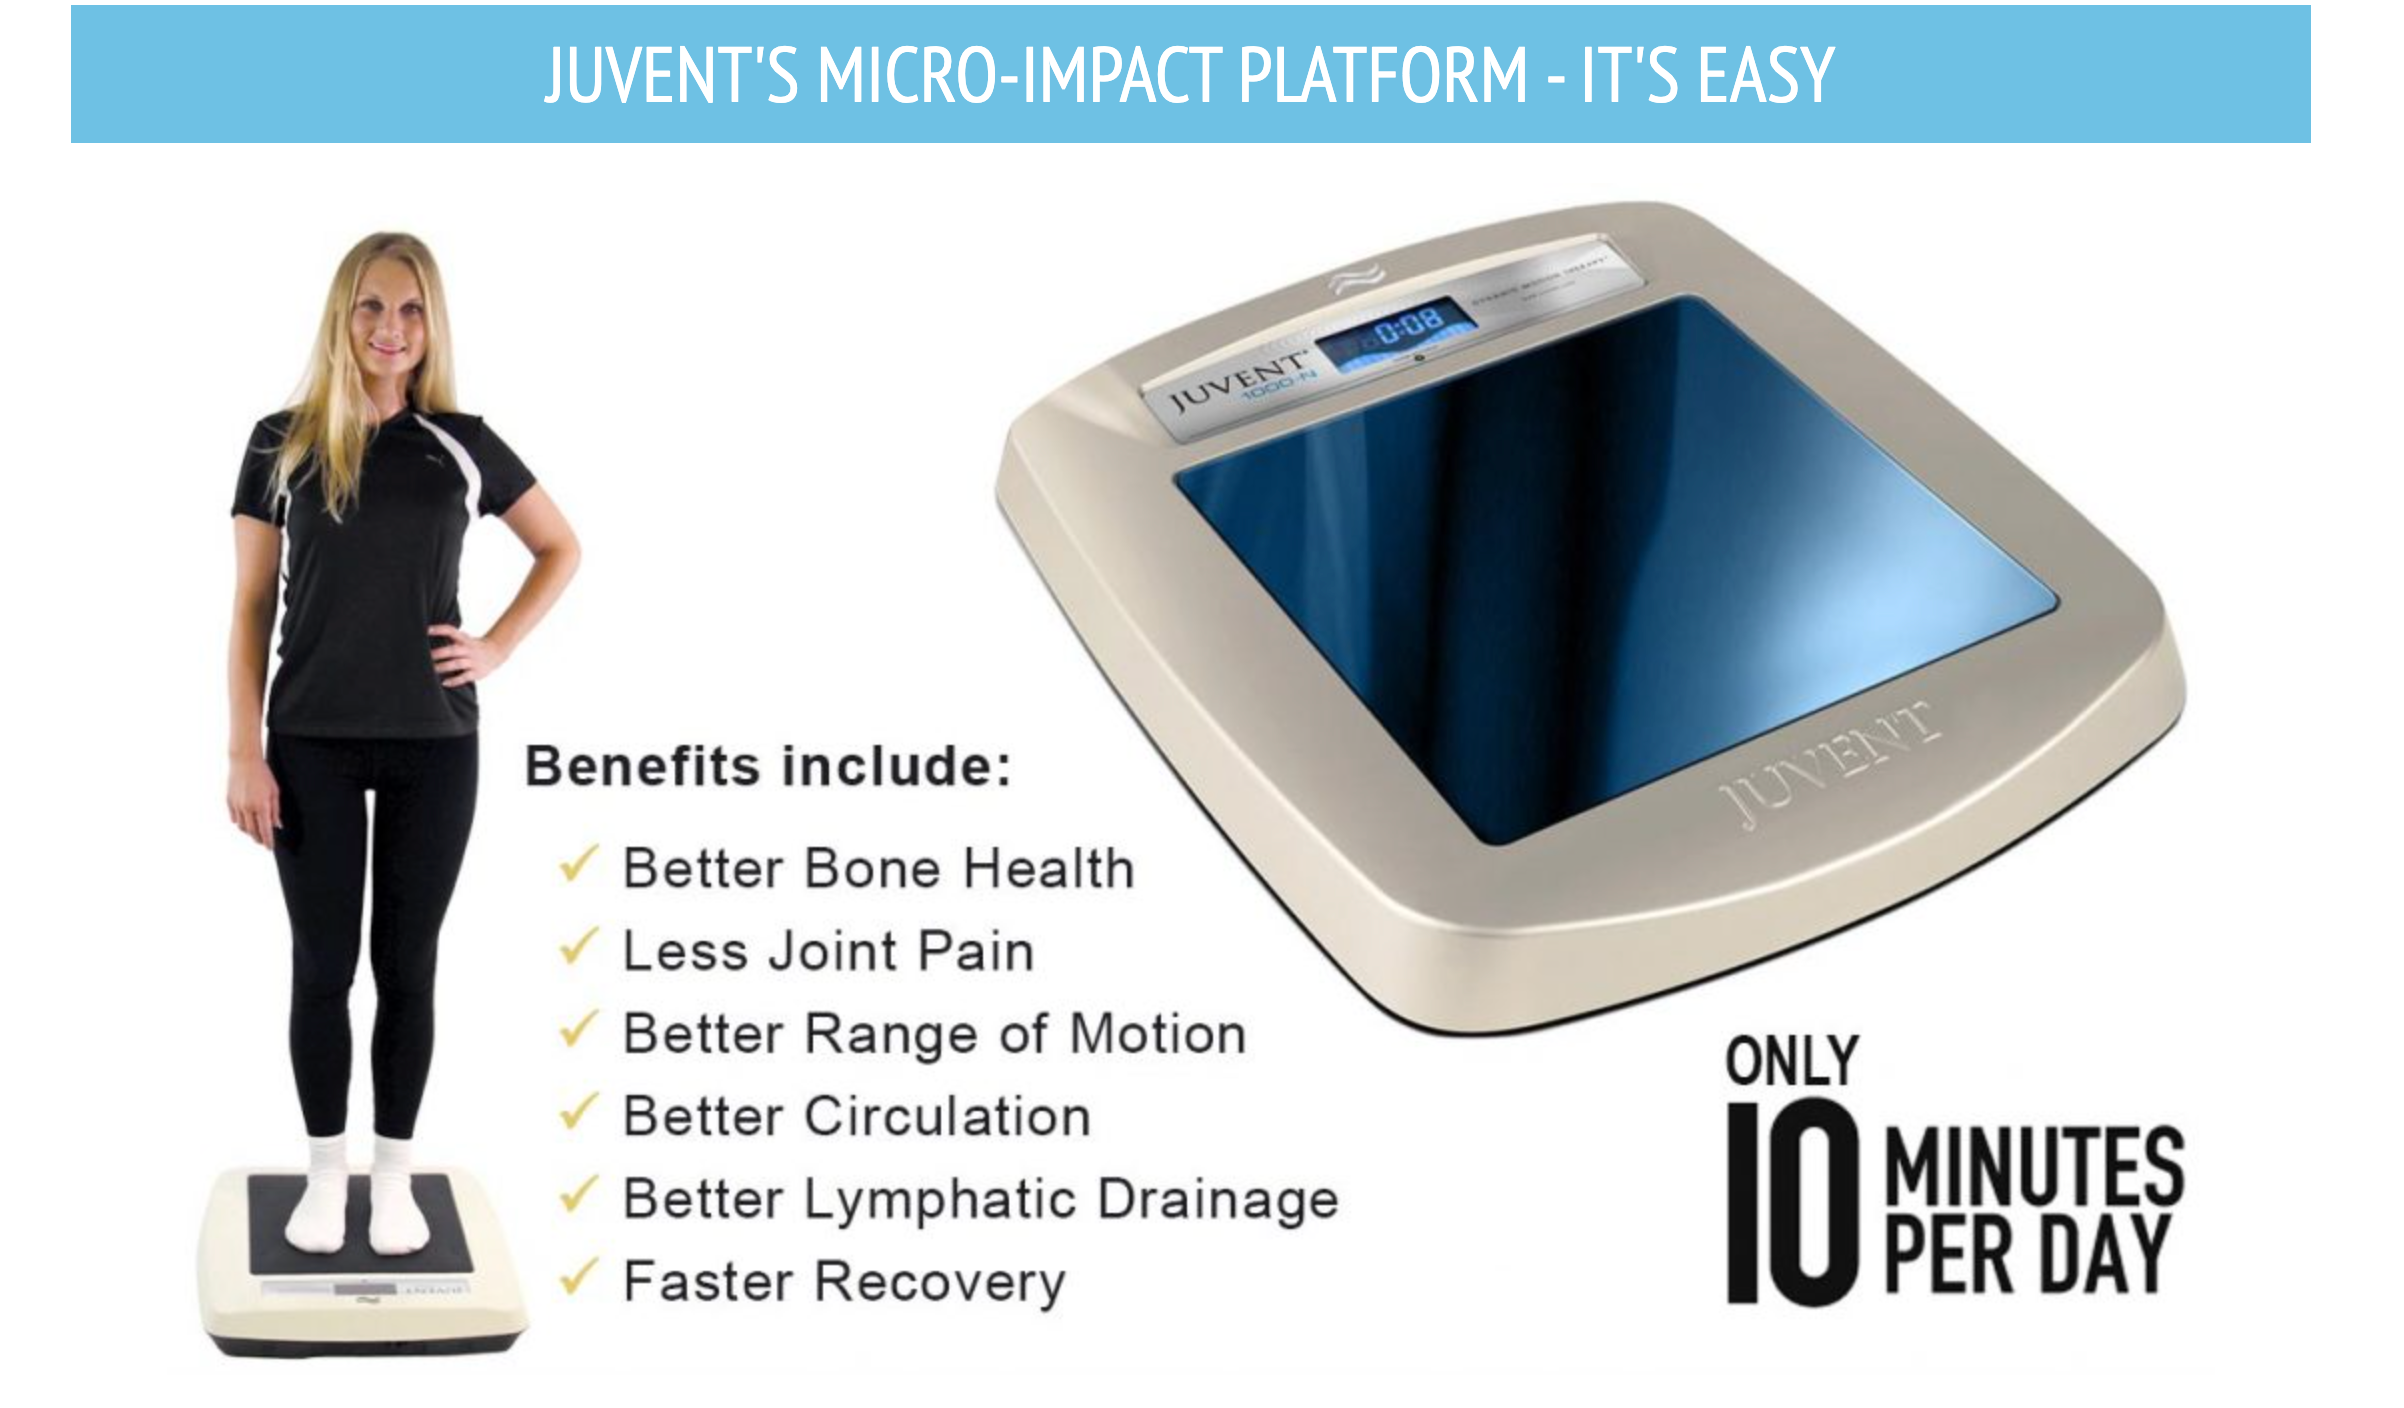 Juvent's micro-impact platform improves bone and joint health, range of motion, circulation, and lymphatic drainage.